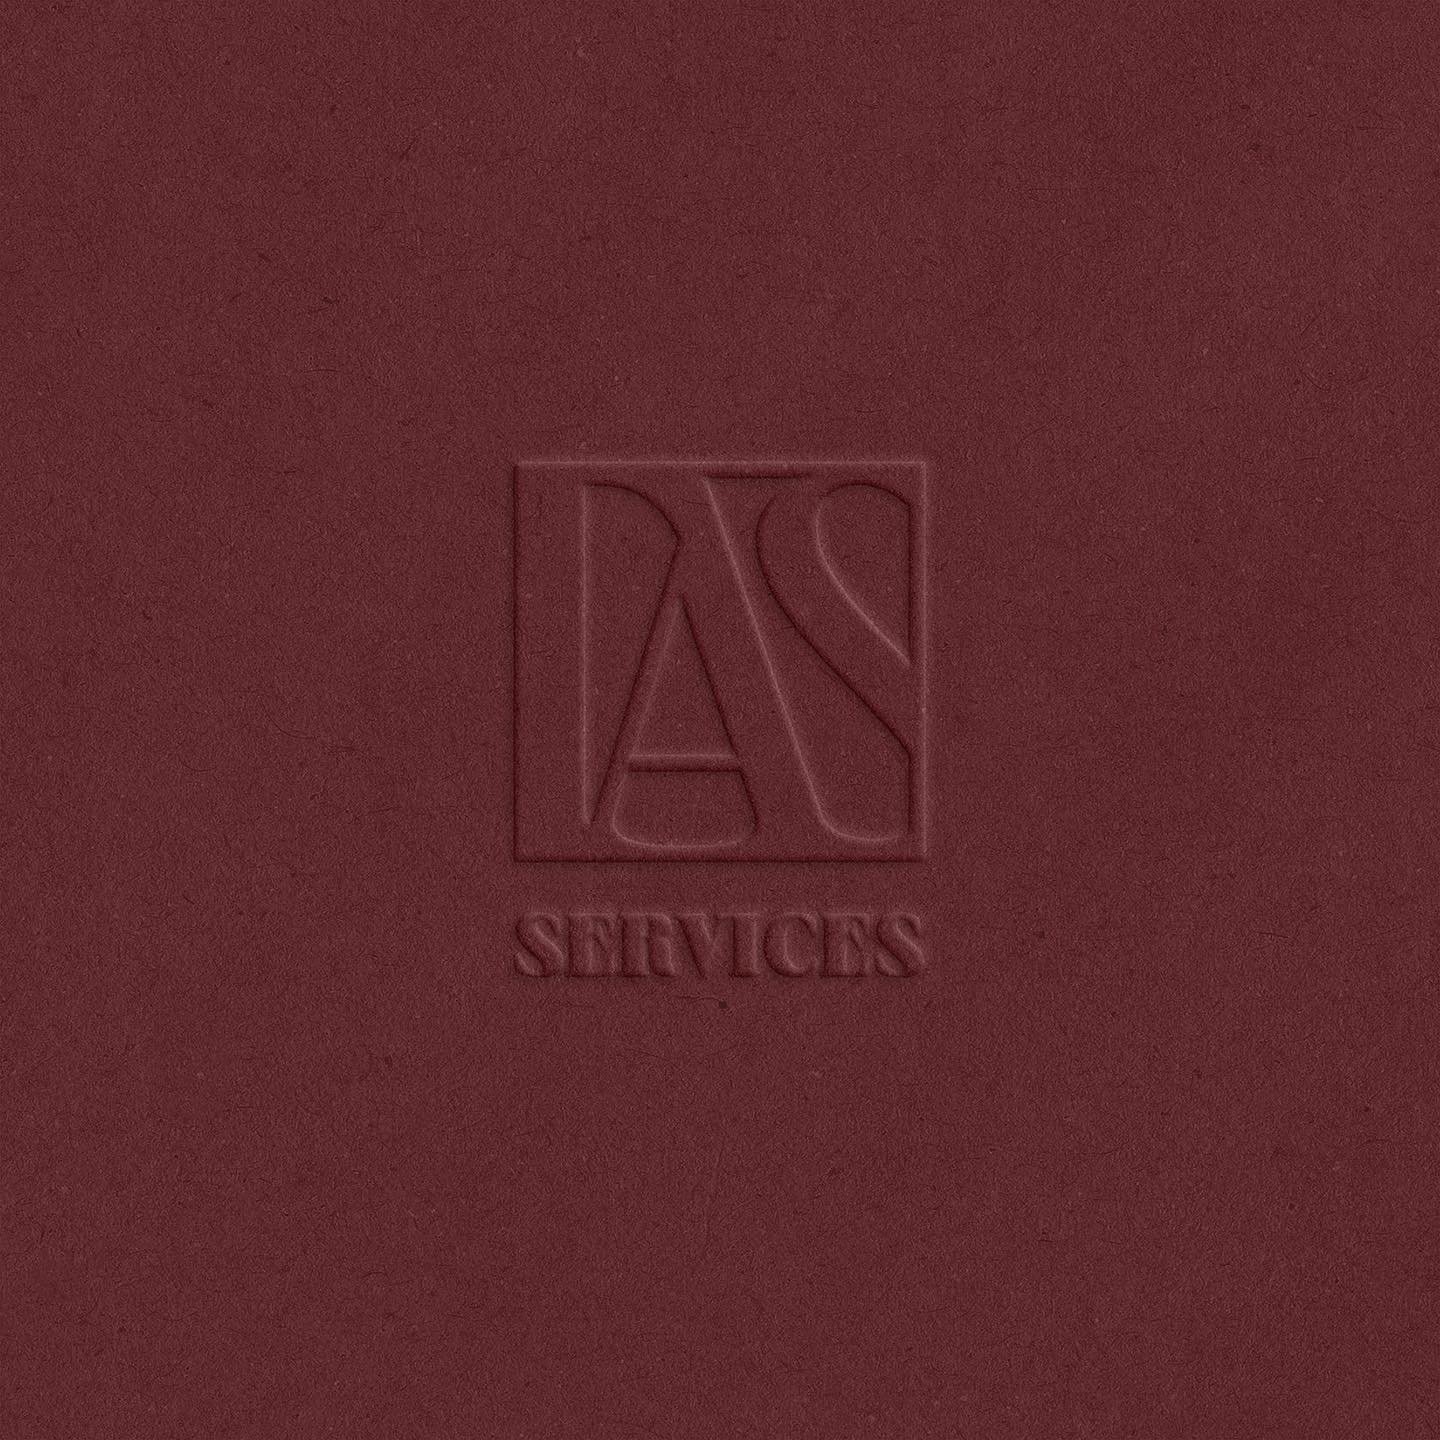 The Archive services 🪩 As a modern boutique-style creative studio, we&rsquo;re dedicated to celebrating the unique essence of each brand through our transformative branding and design services. 

Feel free to complete the inquiry form on our website